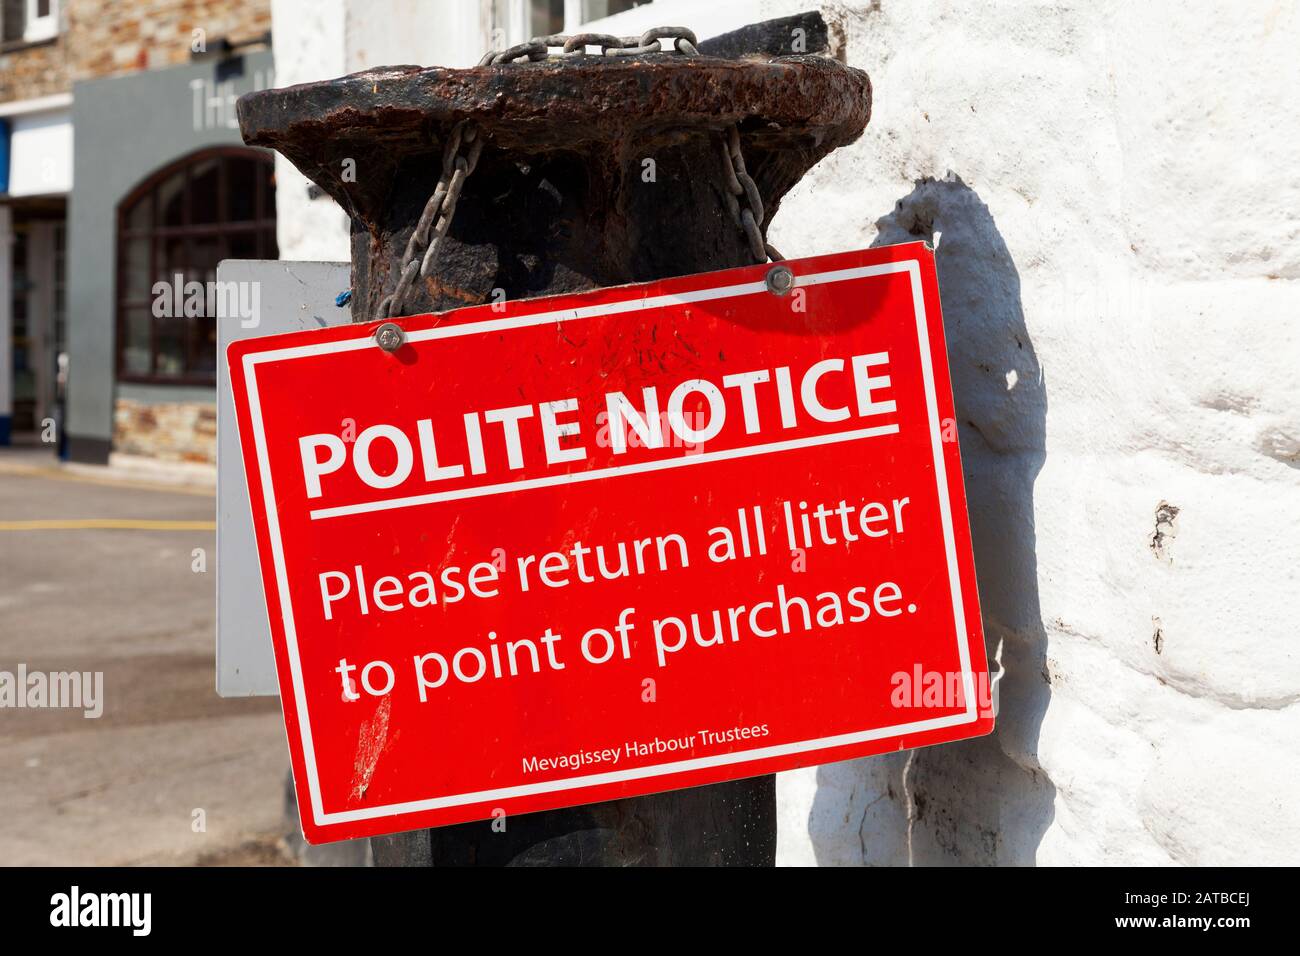 A local council polite notice in the U.K. Stock Photo